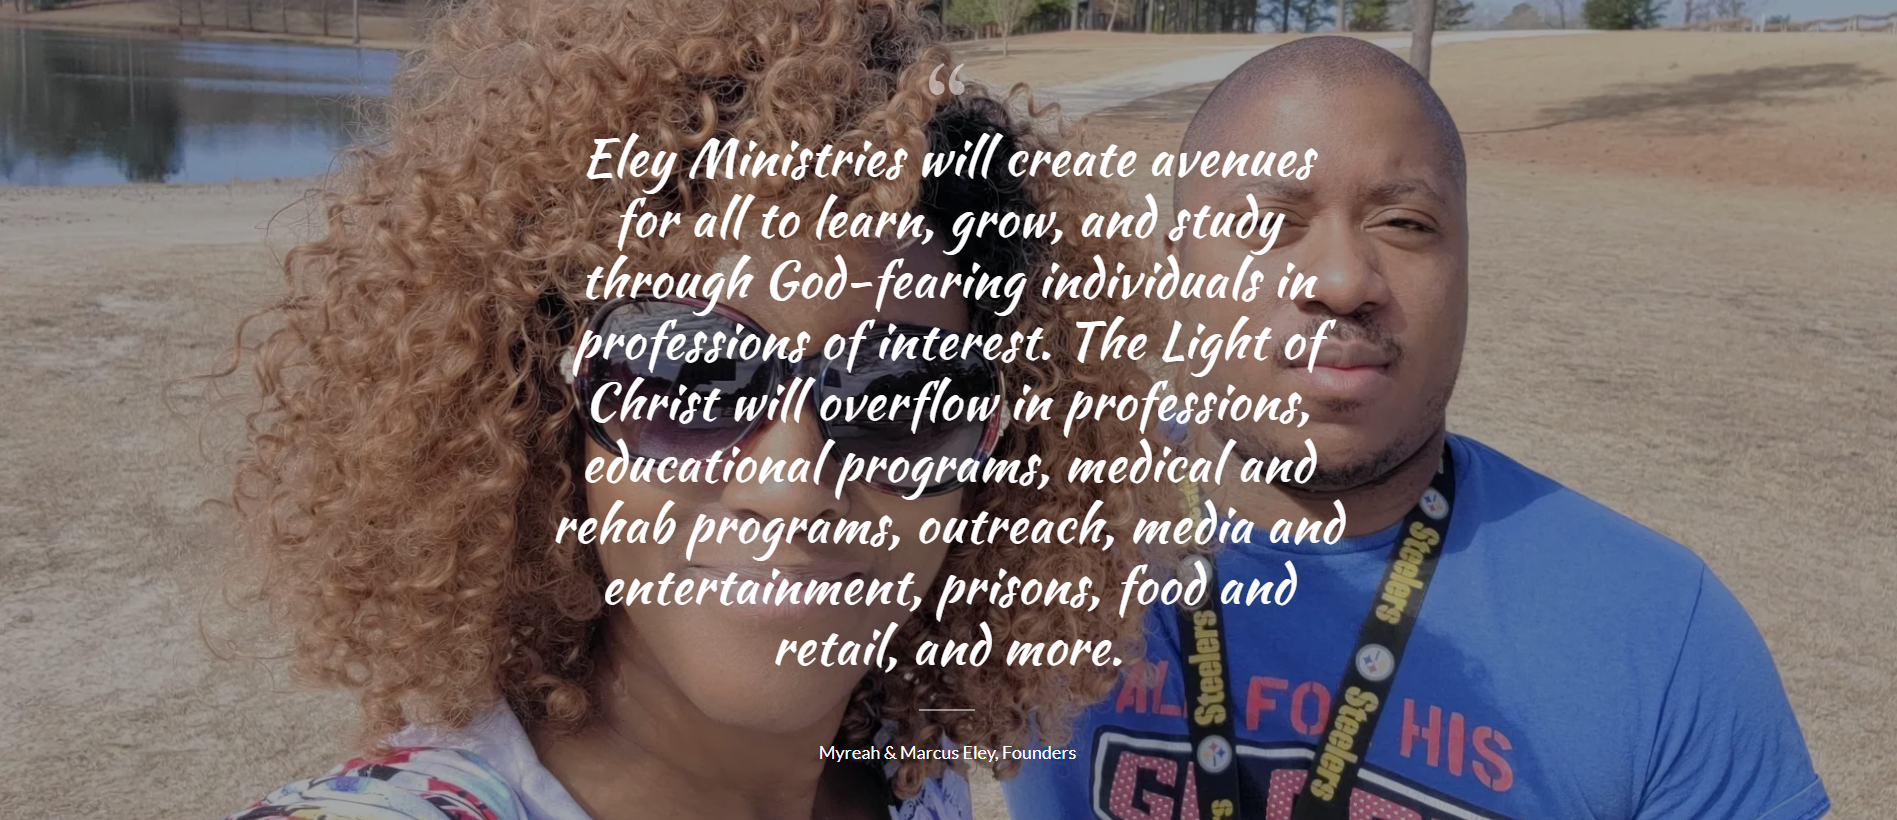 "Eley Ministries will create avenues for all to learn, grow, and study through God-fearing individuals in professions of interest. The Light of Christ will overflow in professions, educational programs, medical and rehab programs, outreach, media and entertainment, prisons, food and retail, and more." - Founders, Myreah and Marcus Eley